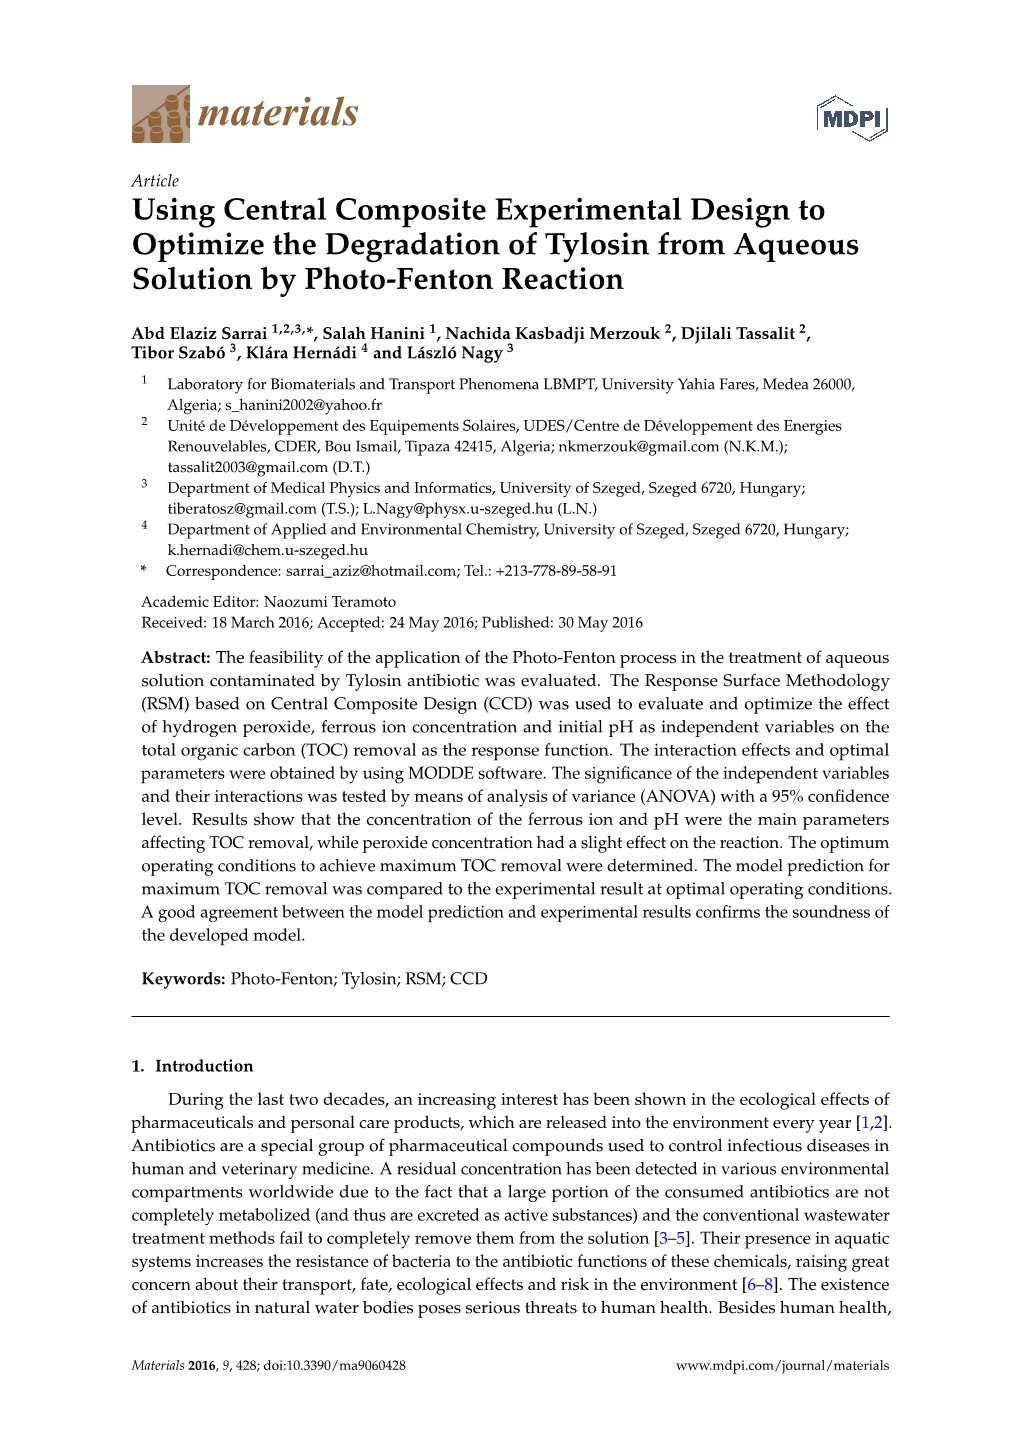 Using Central Composite Experimental Design to Optimize the Degradation of Tylosin from Aqueous Solution by Photo-Fenton Reaction